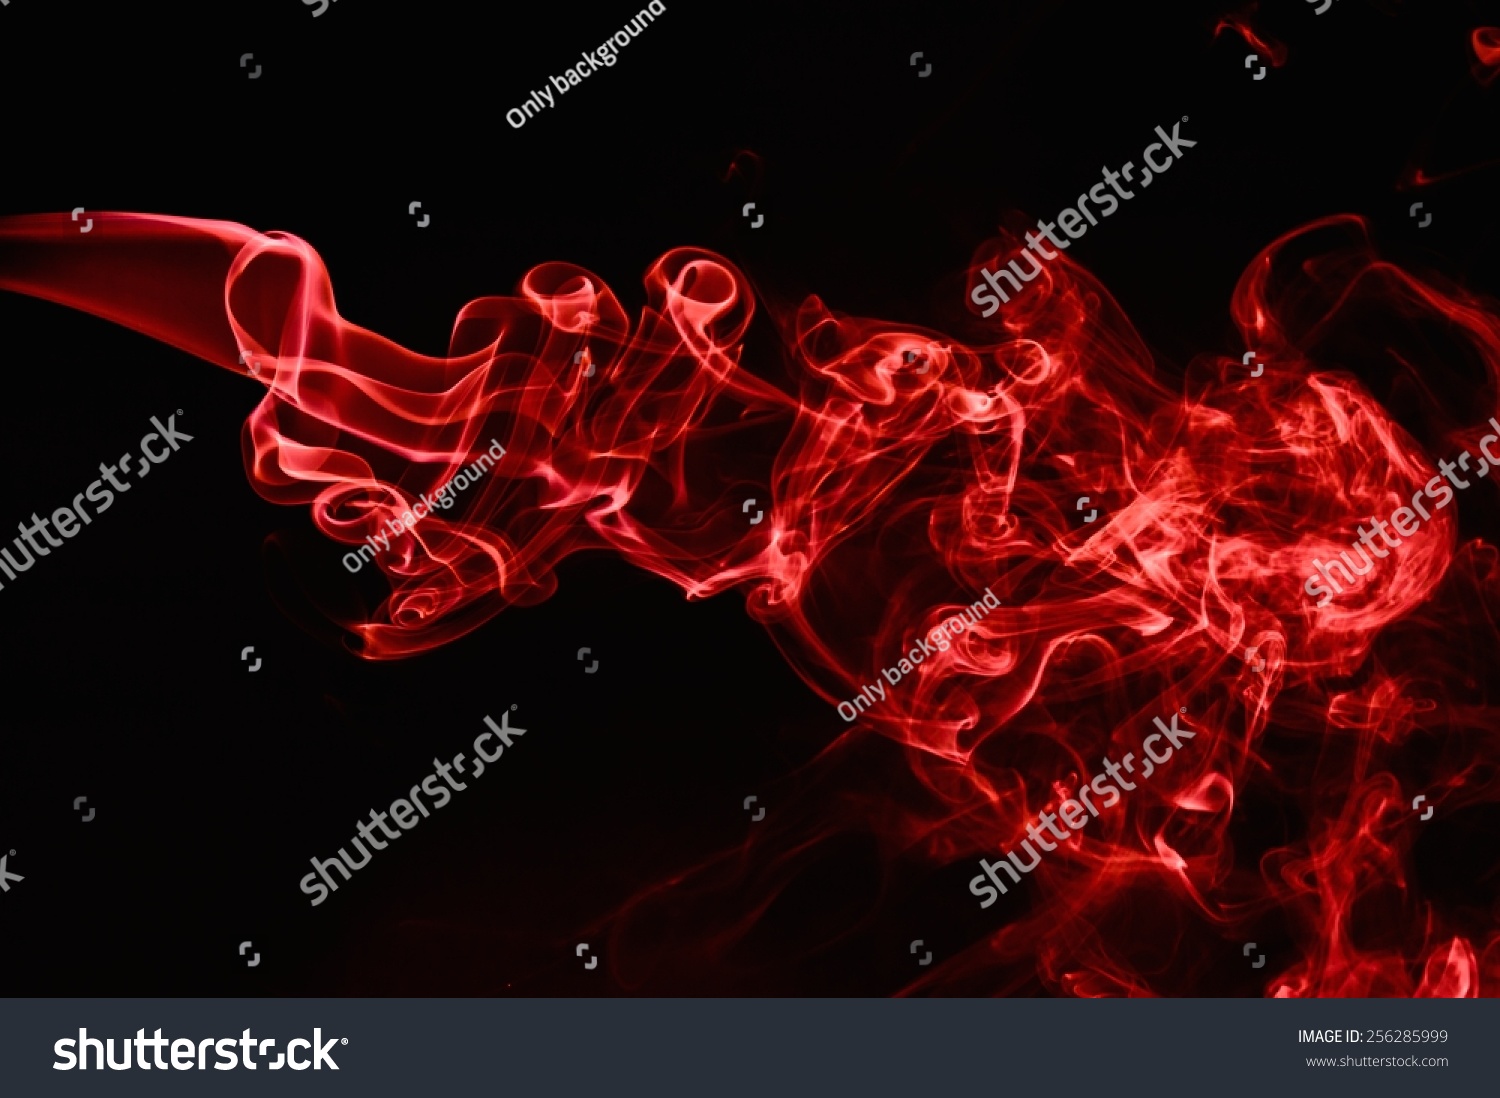 Red Smoke abstract background. #256285999